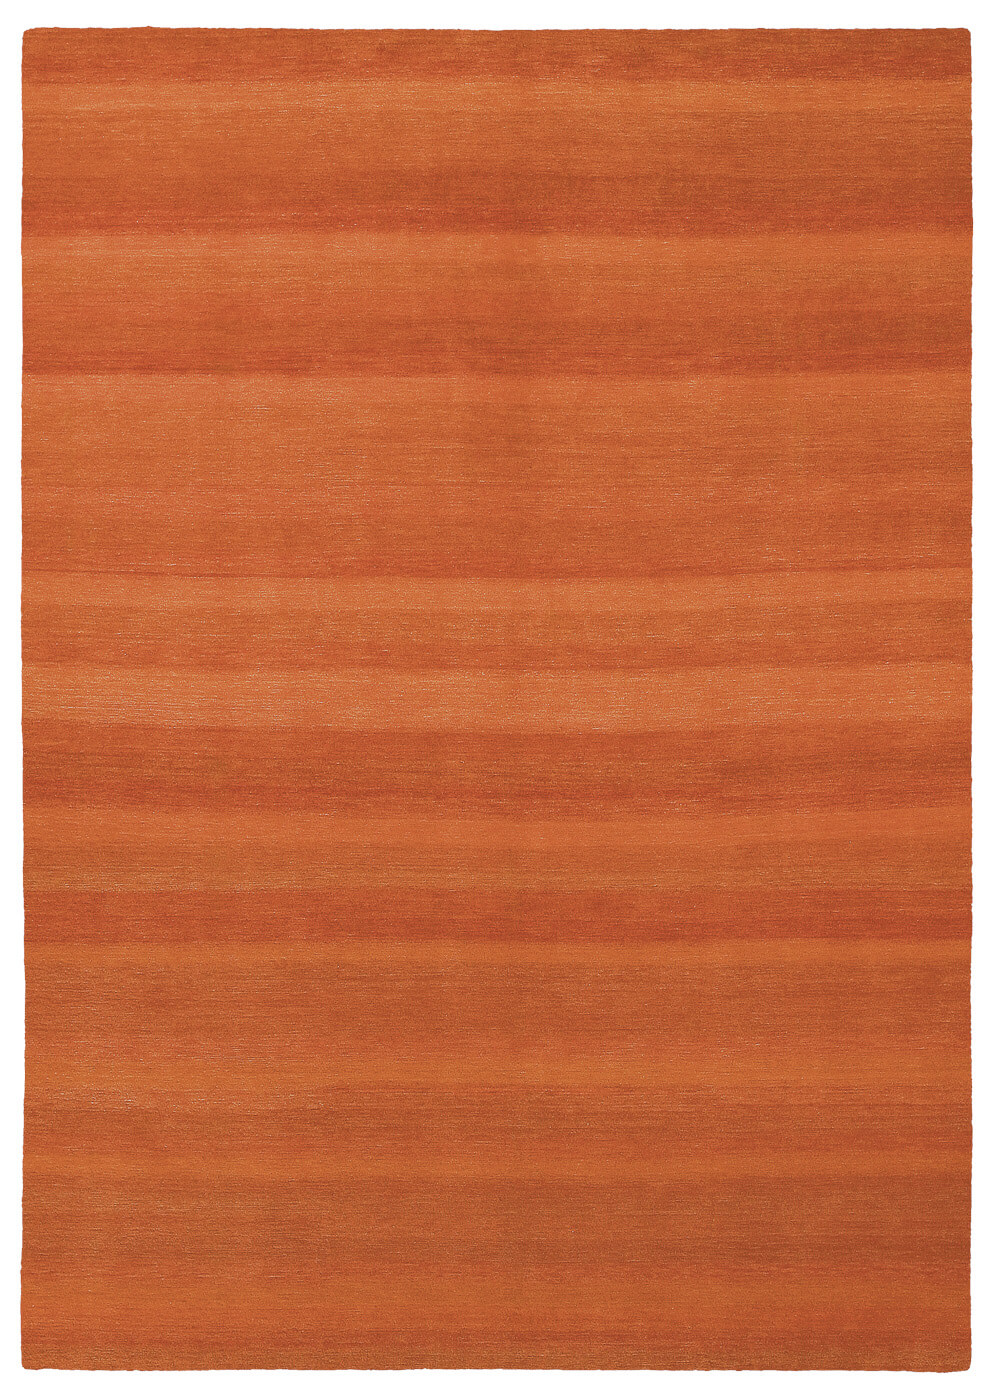 Hand-Knotted Wool Brown Stripes Rug